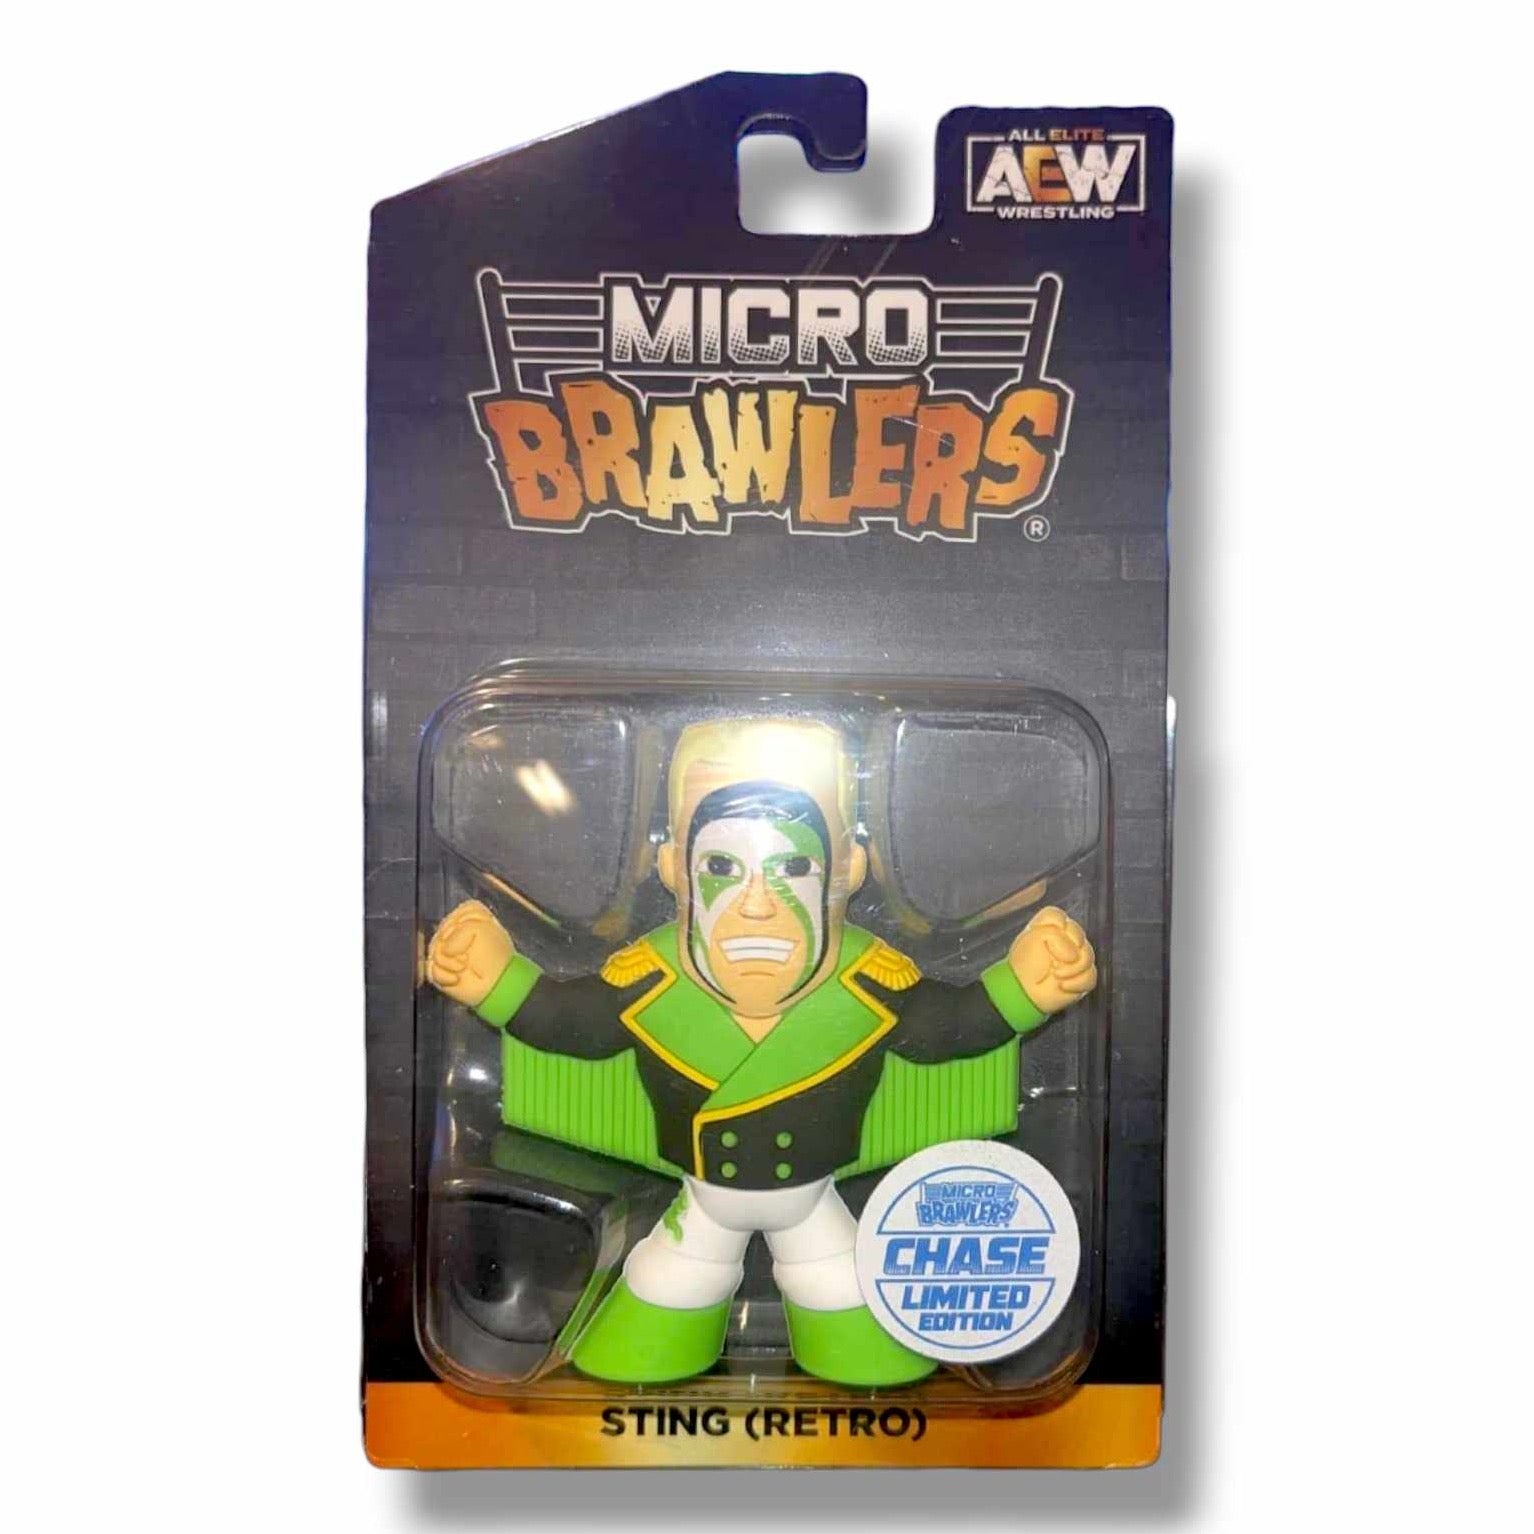 2022 AEW Pro Wrestling Tees Micro Brawlers Limited Edition Sting